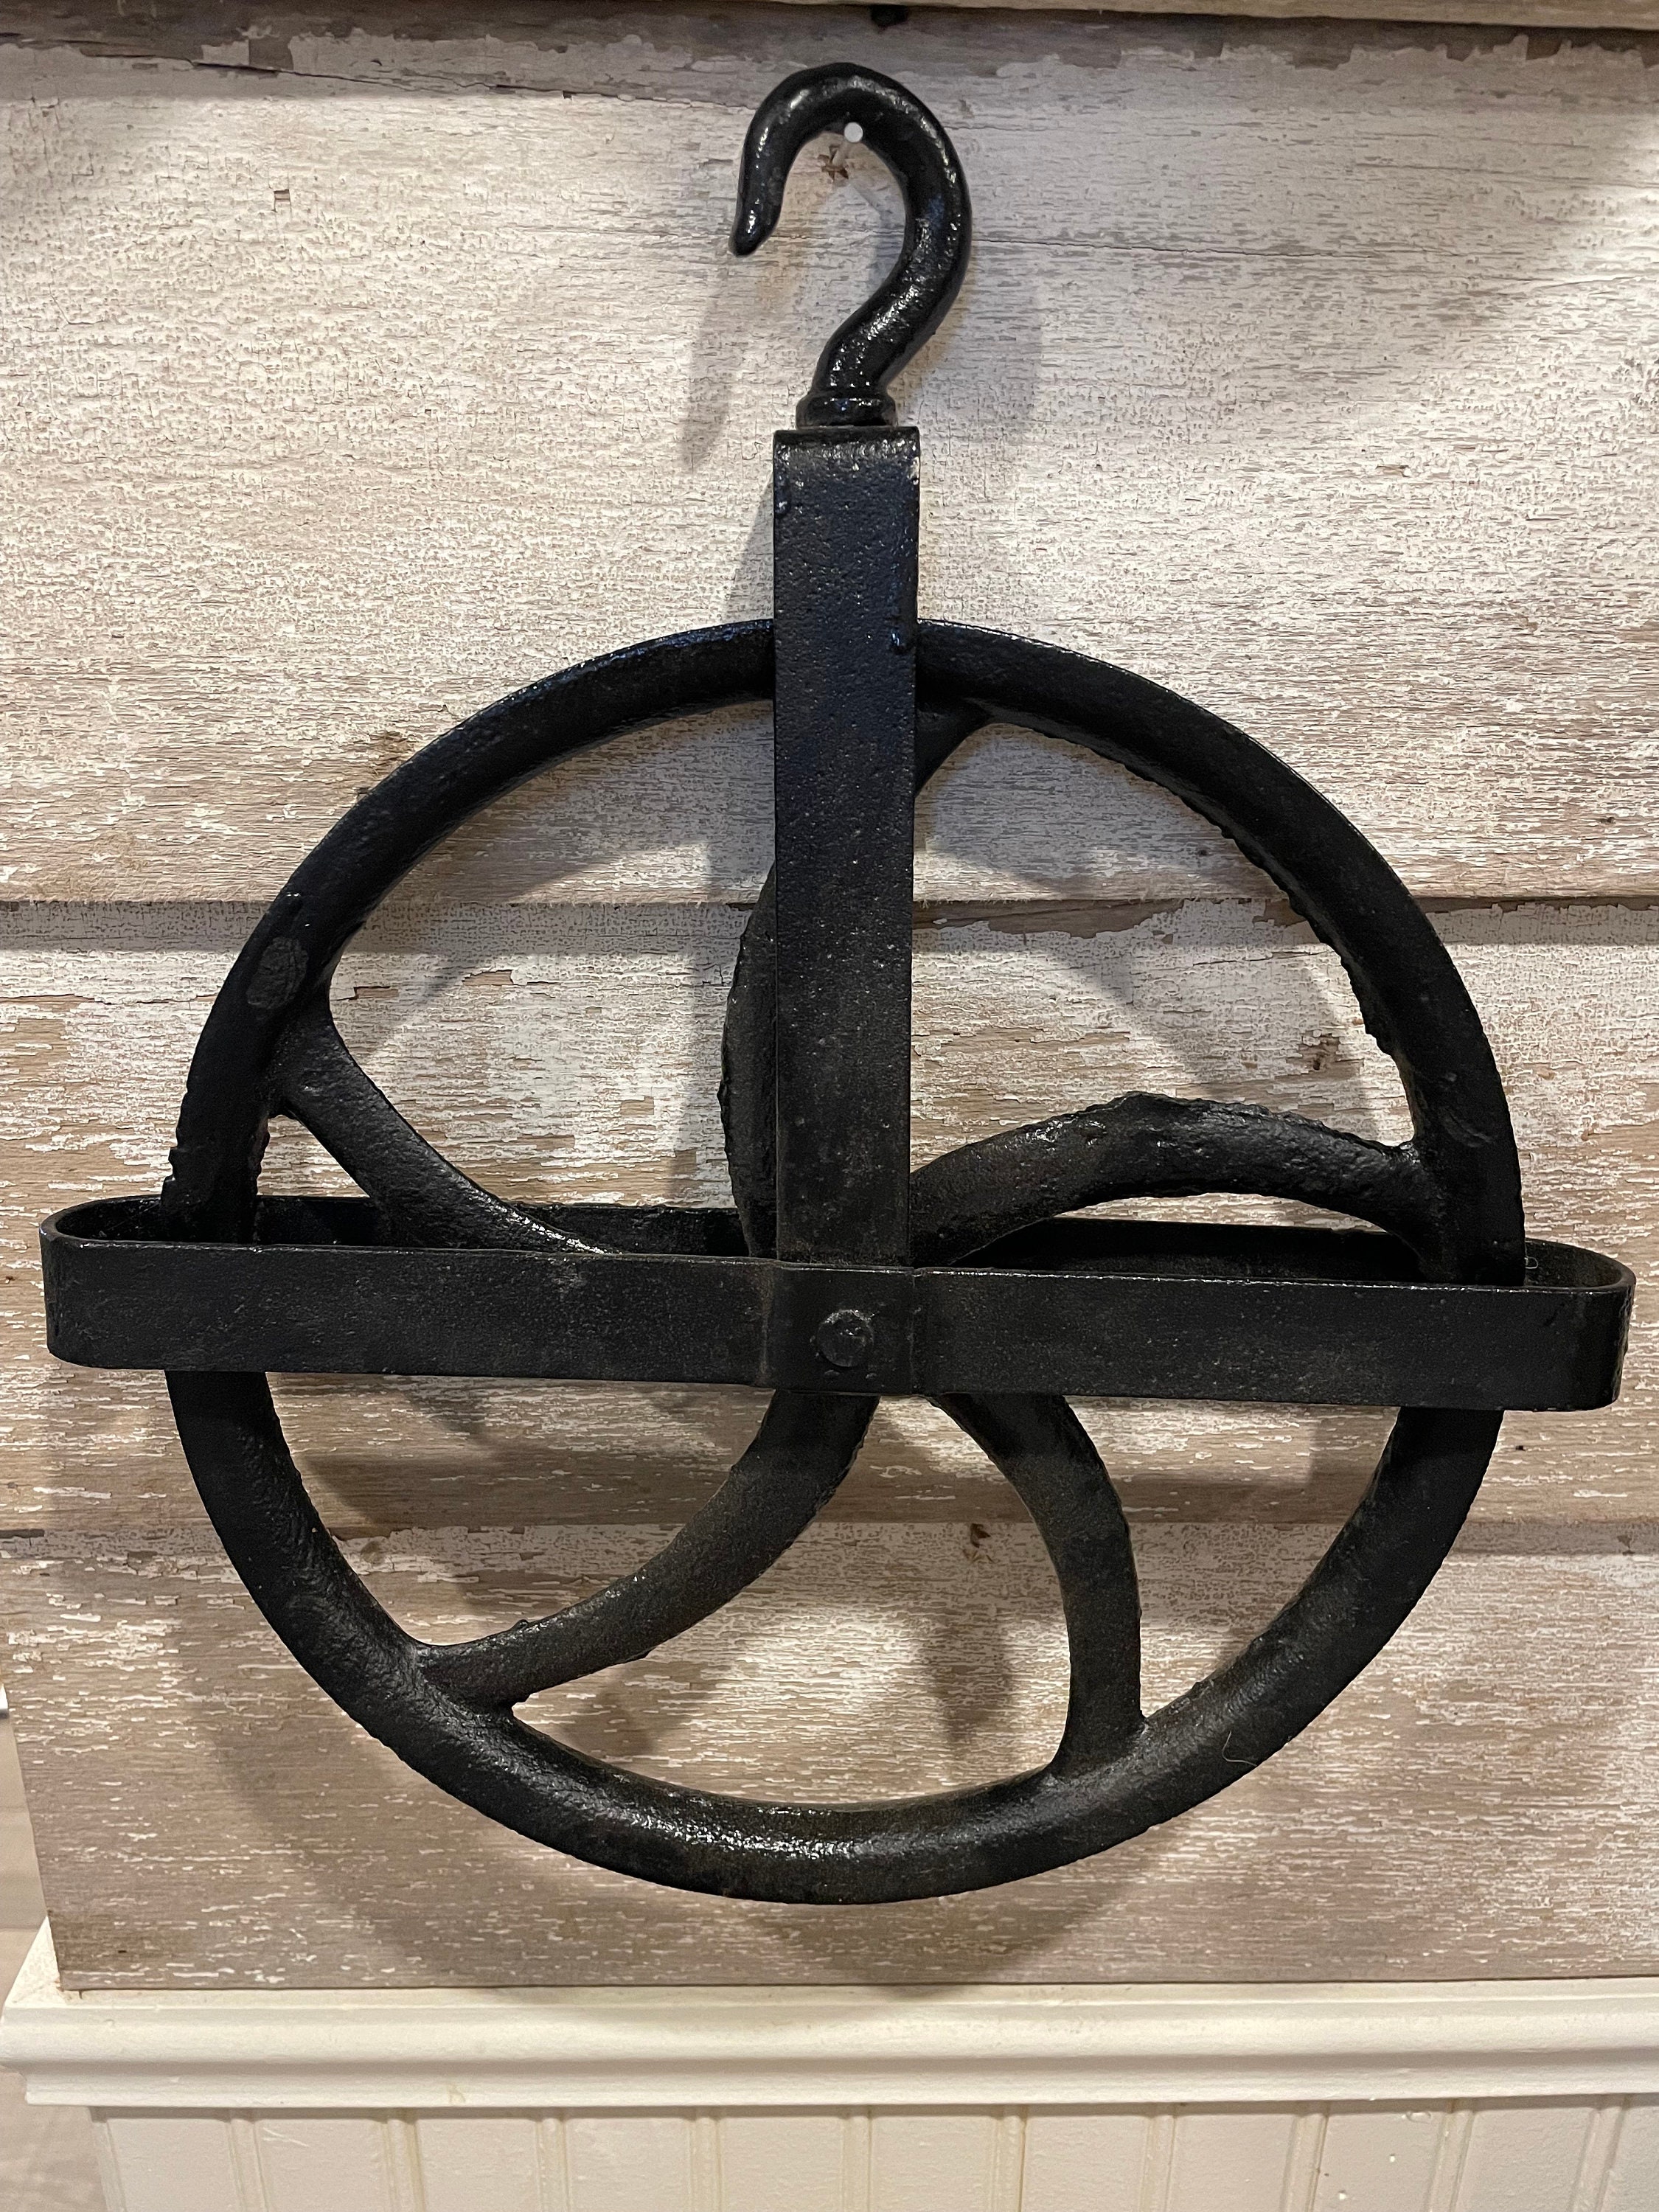 Antique well pulley in nice restored condition and black paint.